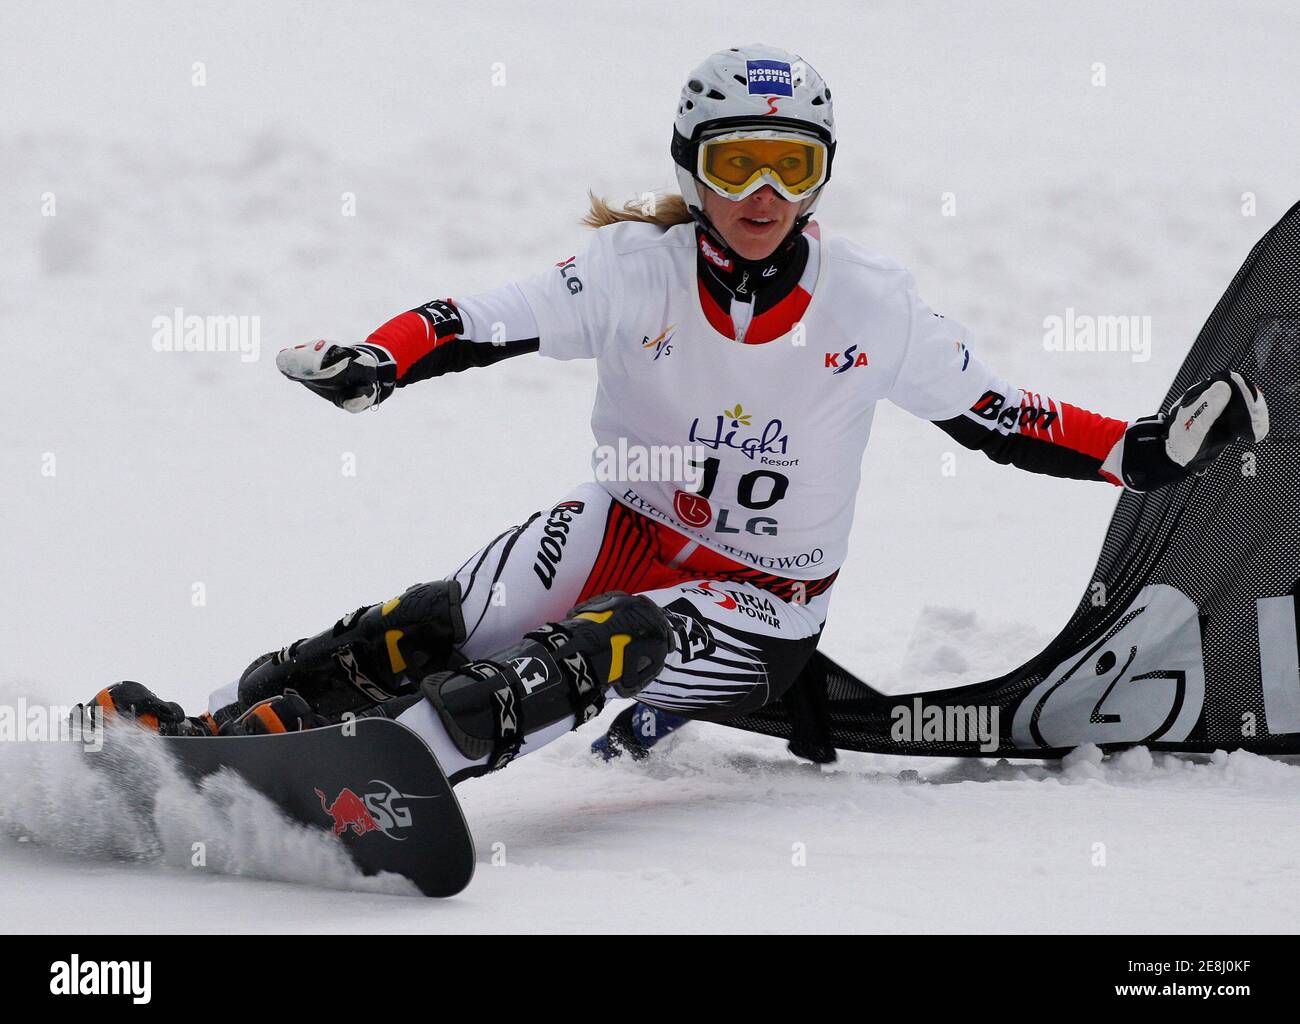 Marion Kreiner of Austria competes during the women's snowboard parallel slalom qualification at the FIS Snowboard World Championships in Hoengseong, east of Seoul, January 21, 2009.  REUTERS/Jo Yong-Hak  (SOUTH KOREA) Stock Photo